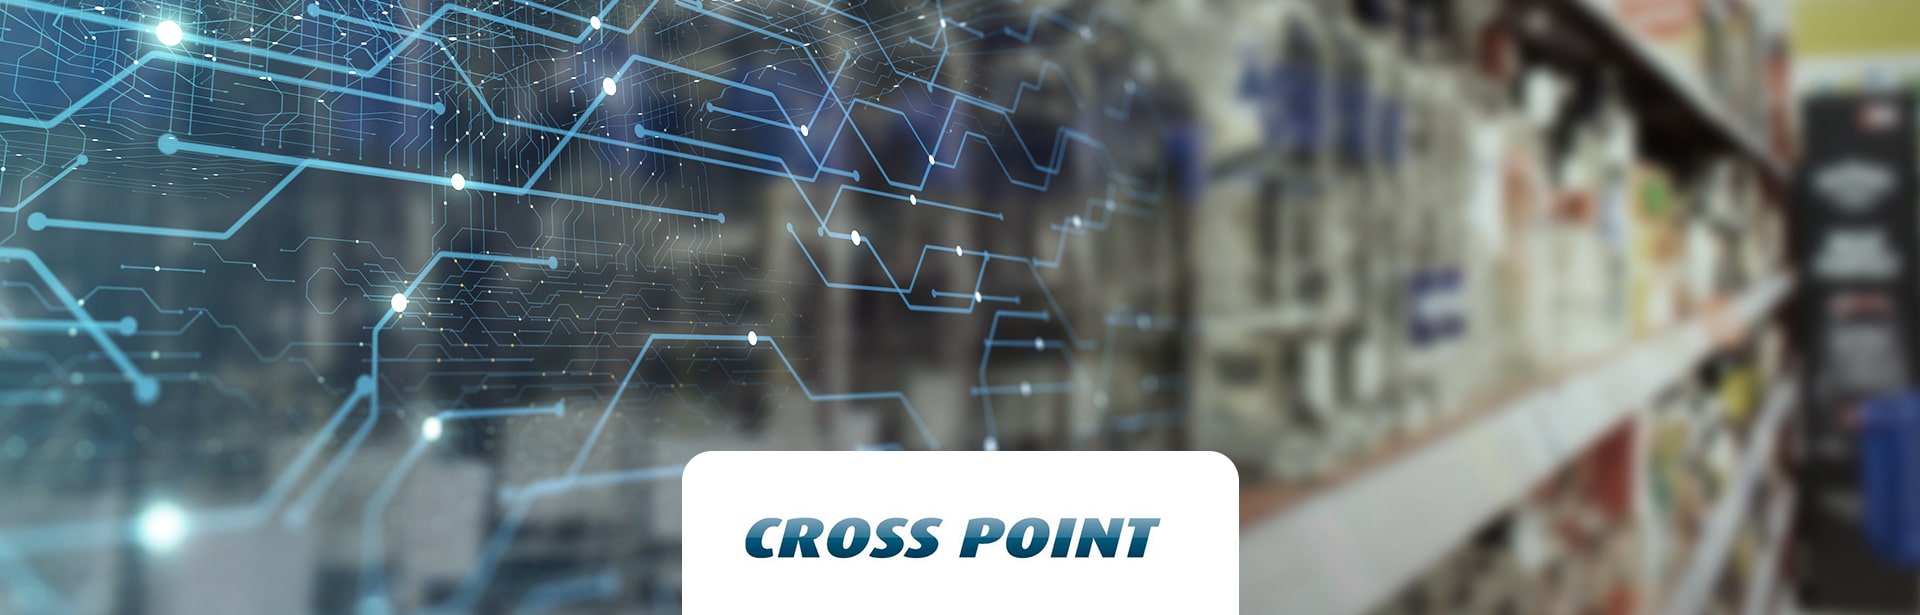 Crosspoint product banner